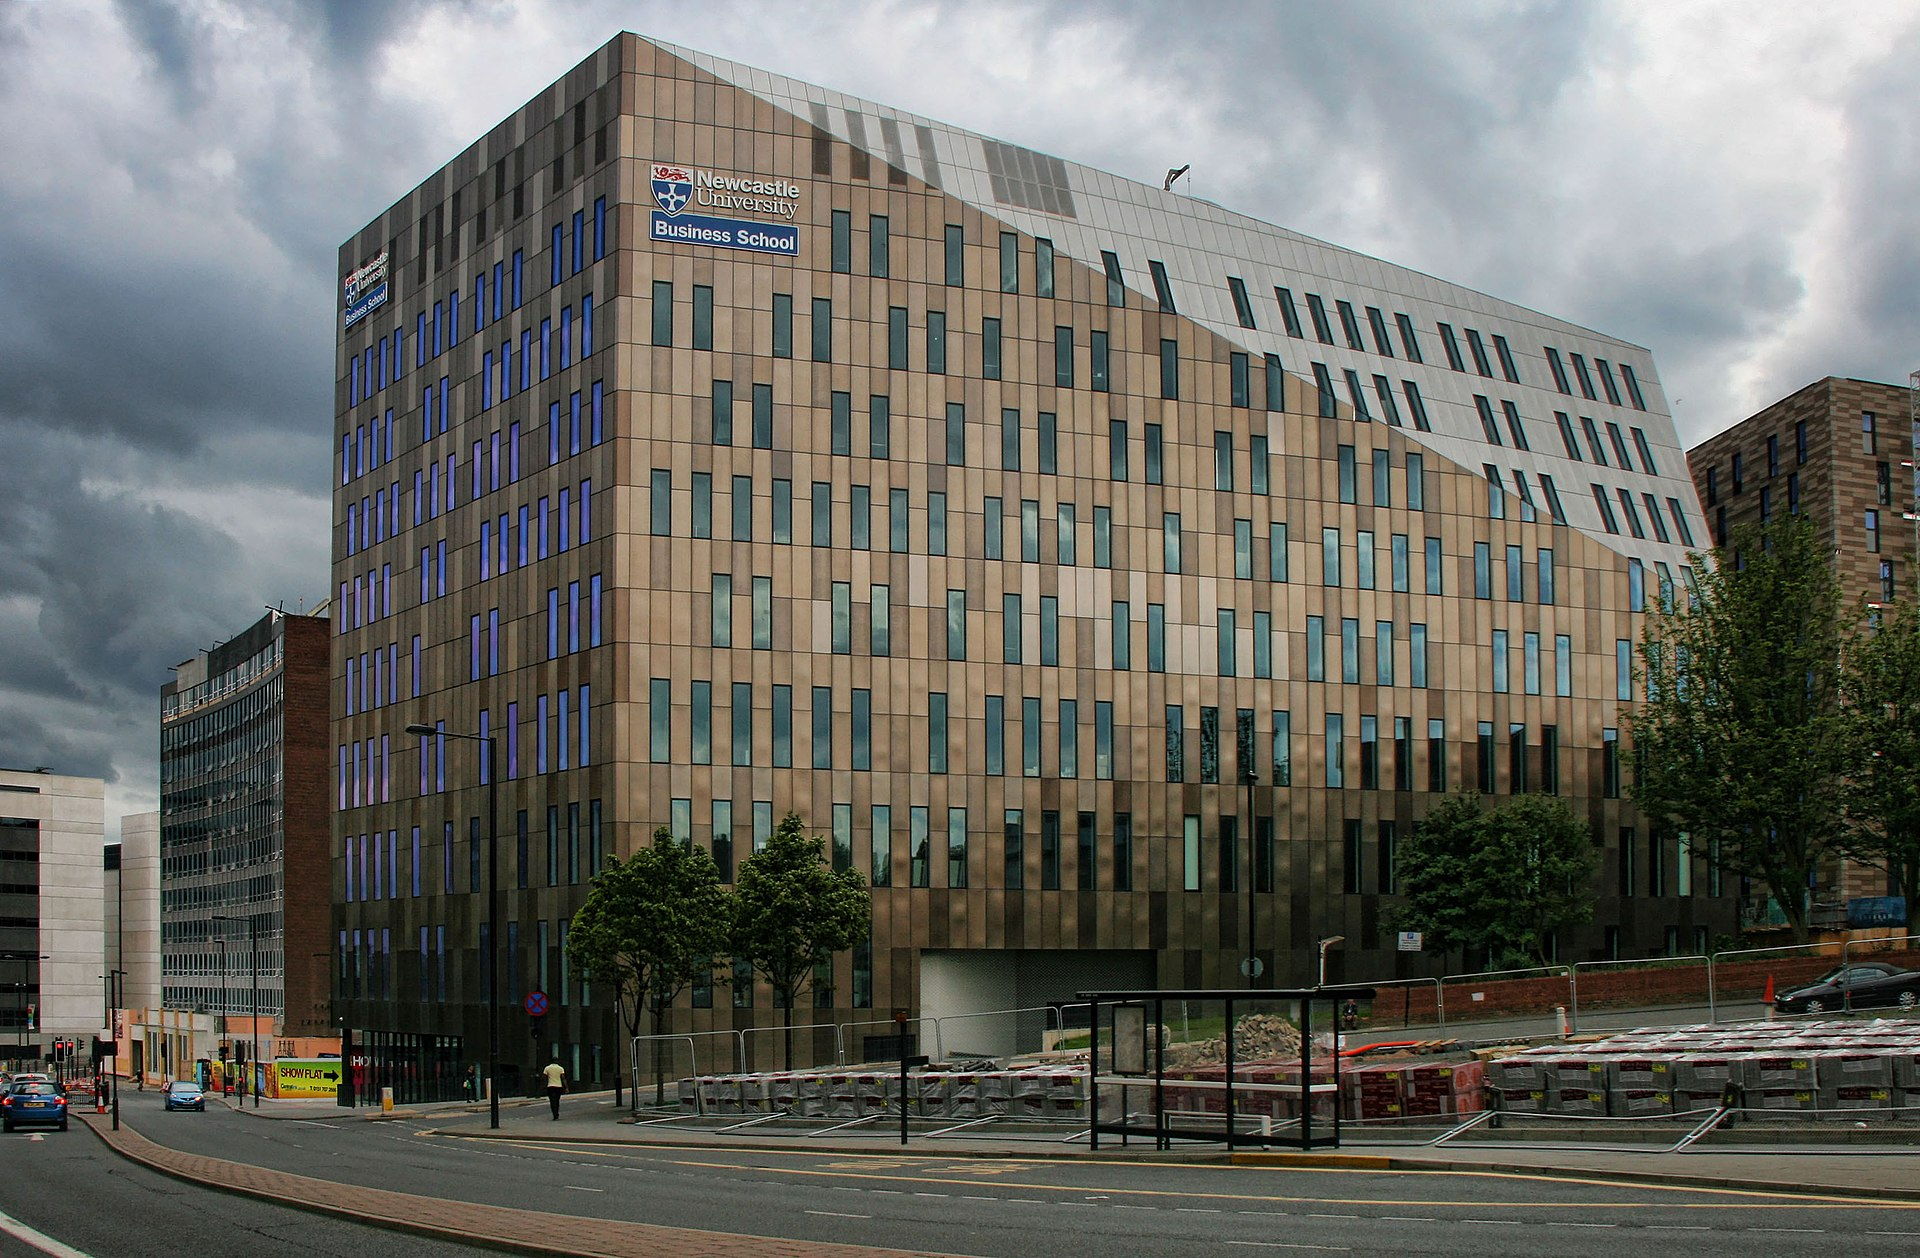 RSECon at Newcastle upon Tyne University, UK. Image by Peter McDermott CC BY-SA 2.0